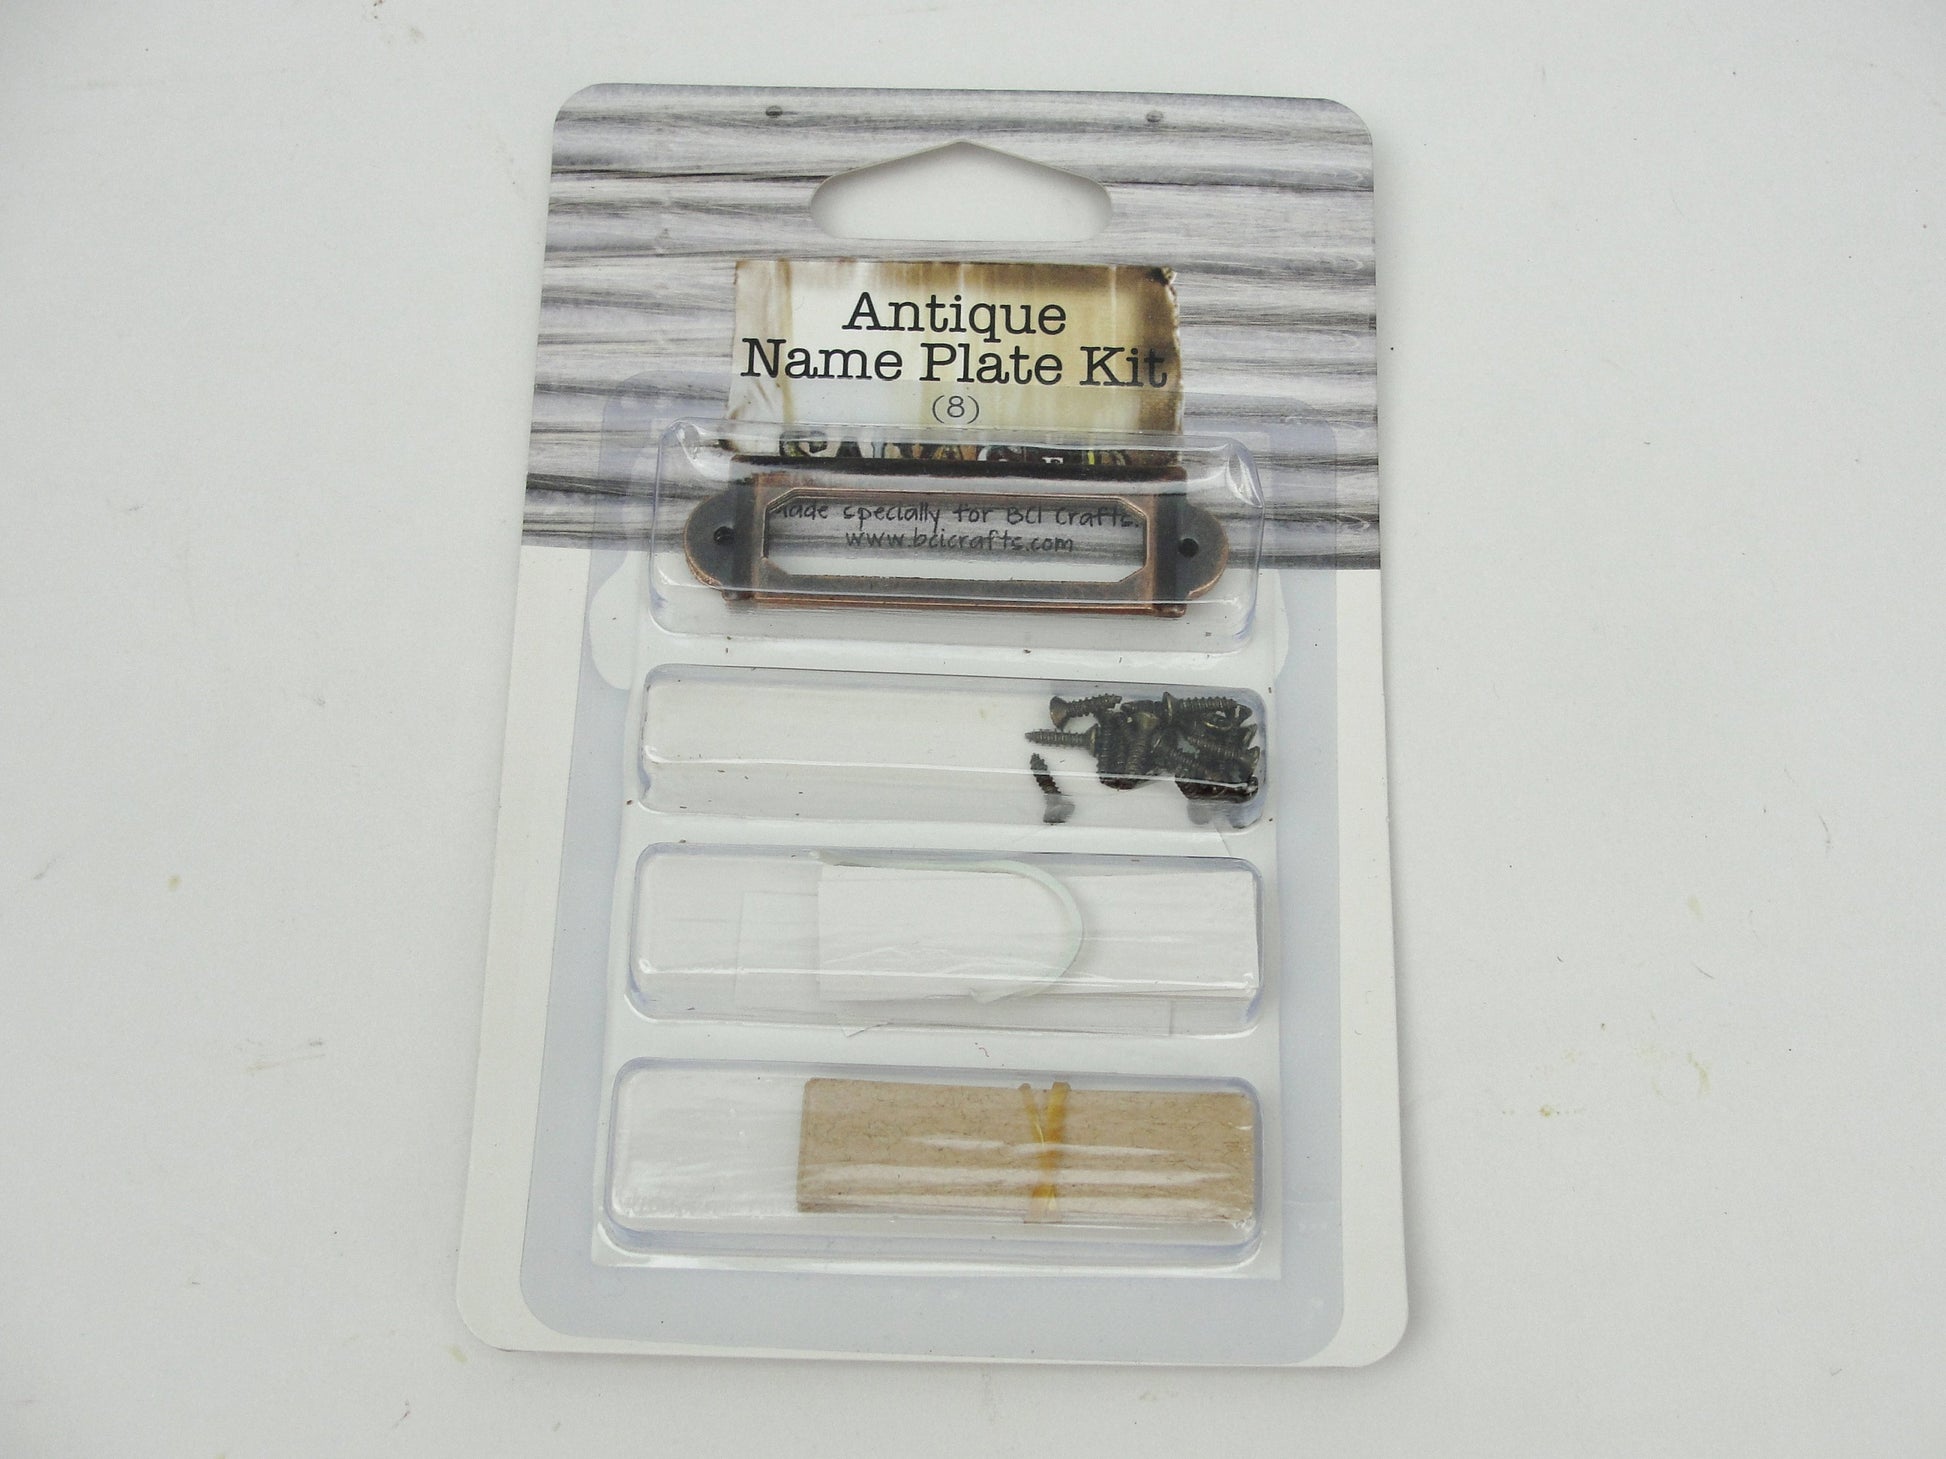 Antique look name plate kit - Mixed Media Art Supplies - Craft Supply House